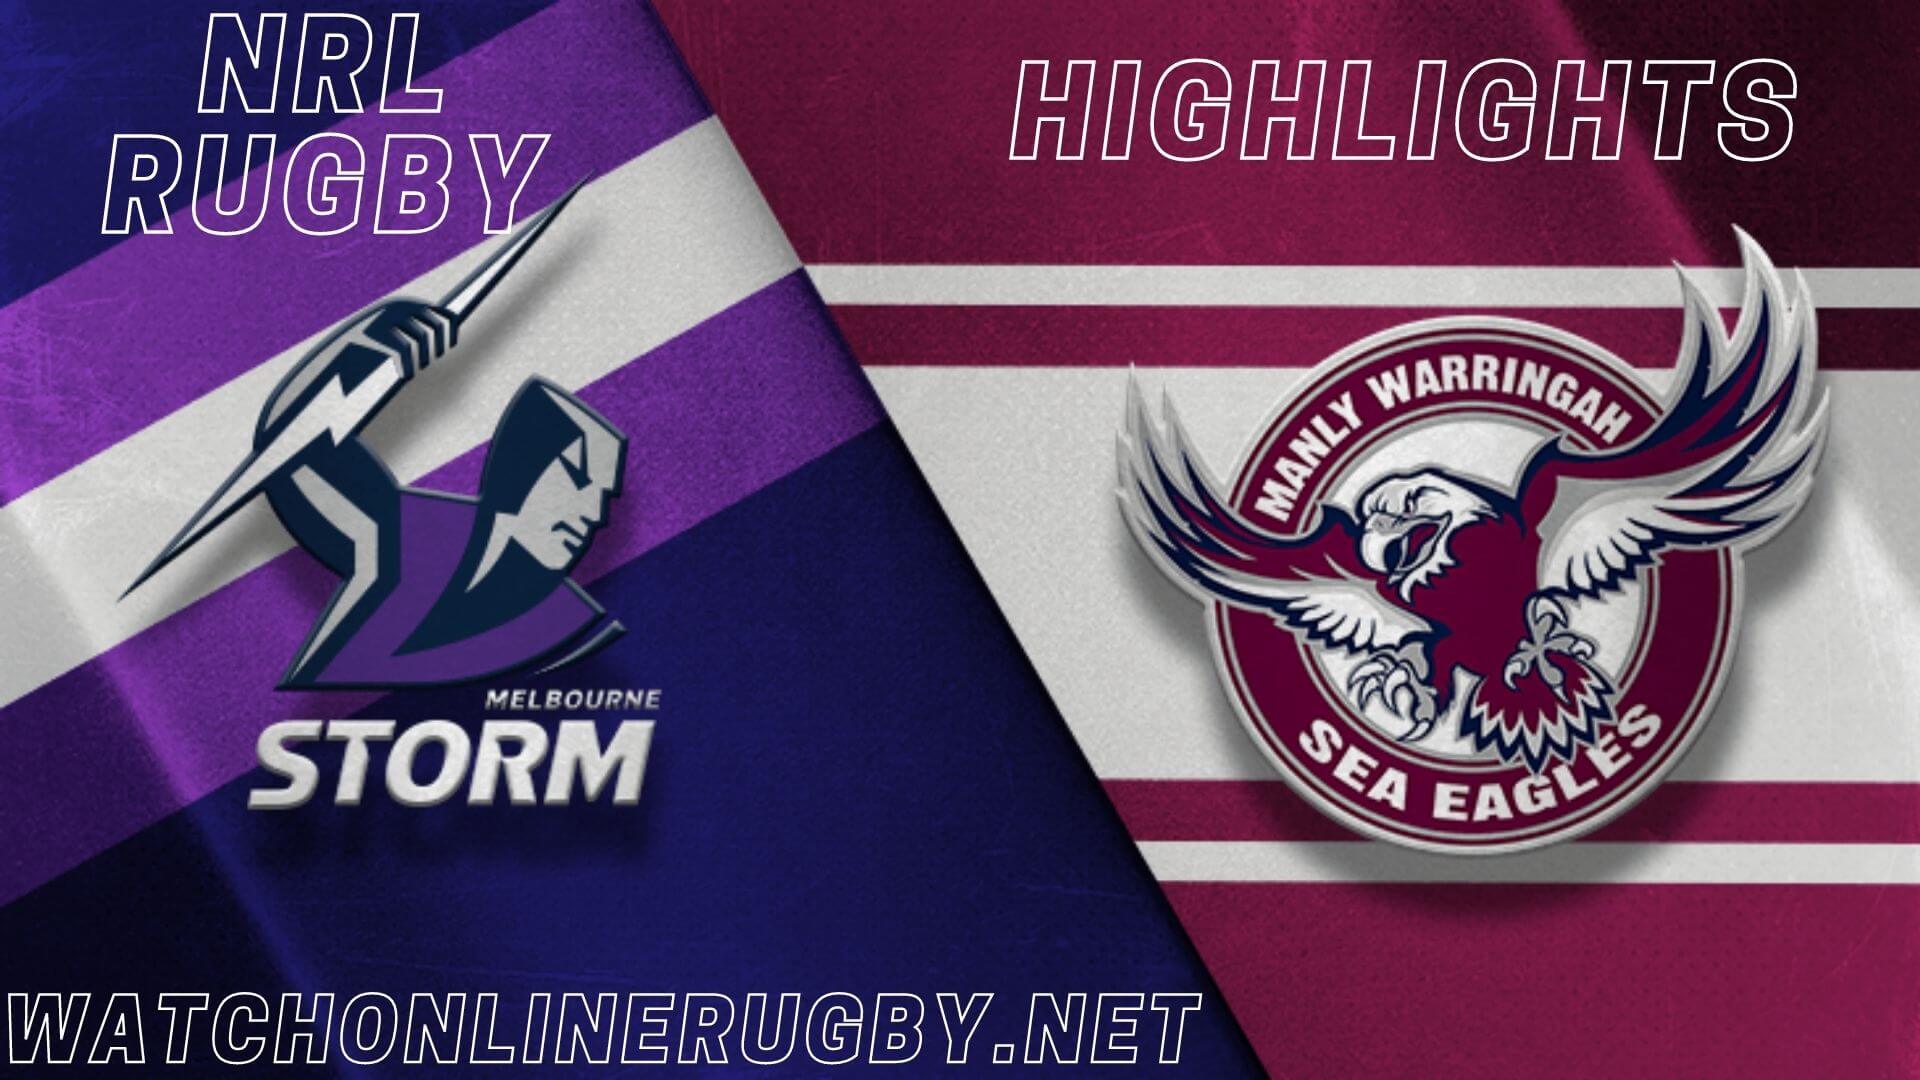 Sea Eagles Vs Storm Highlights RD 16 NRL Rugby